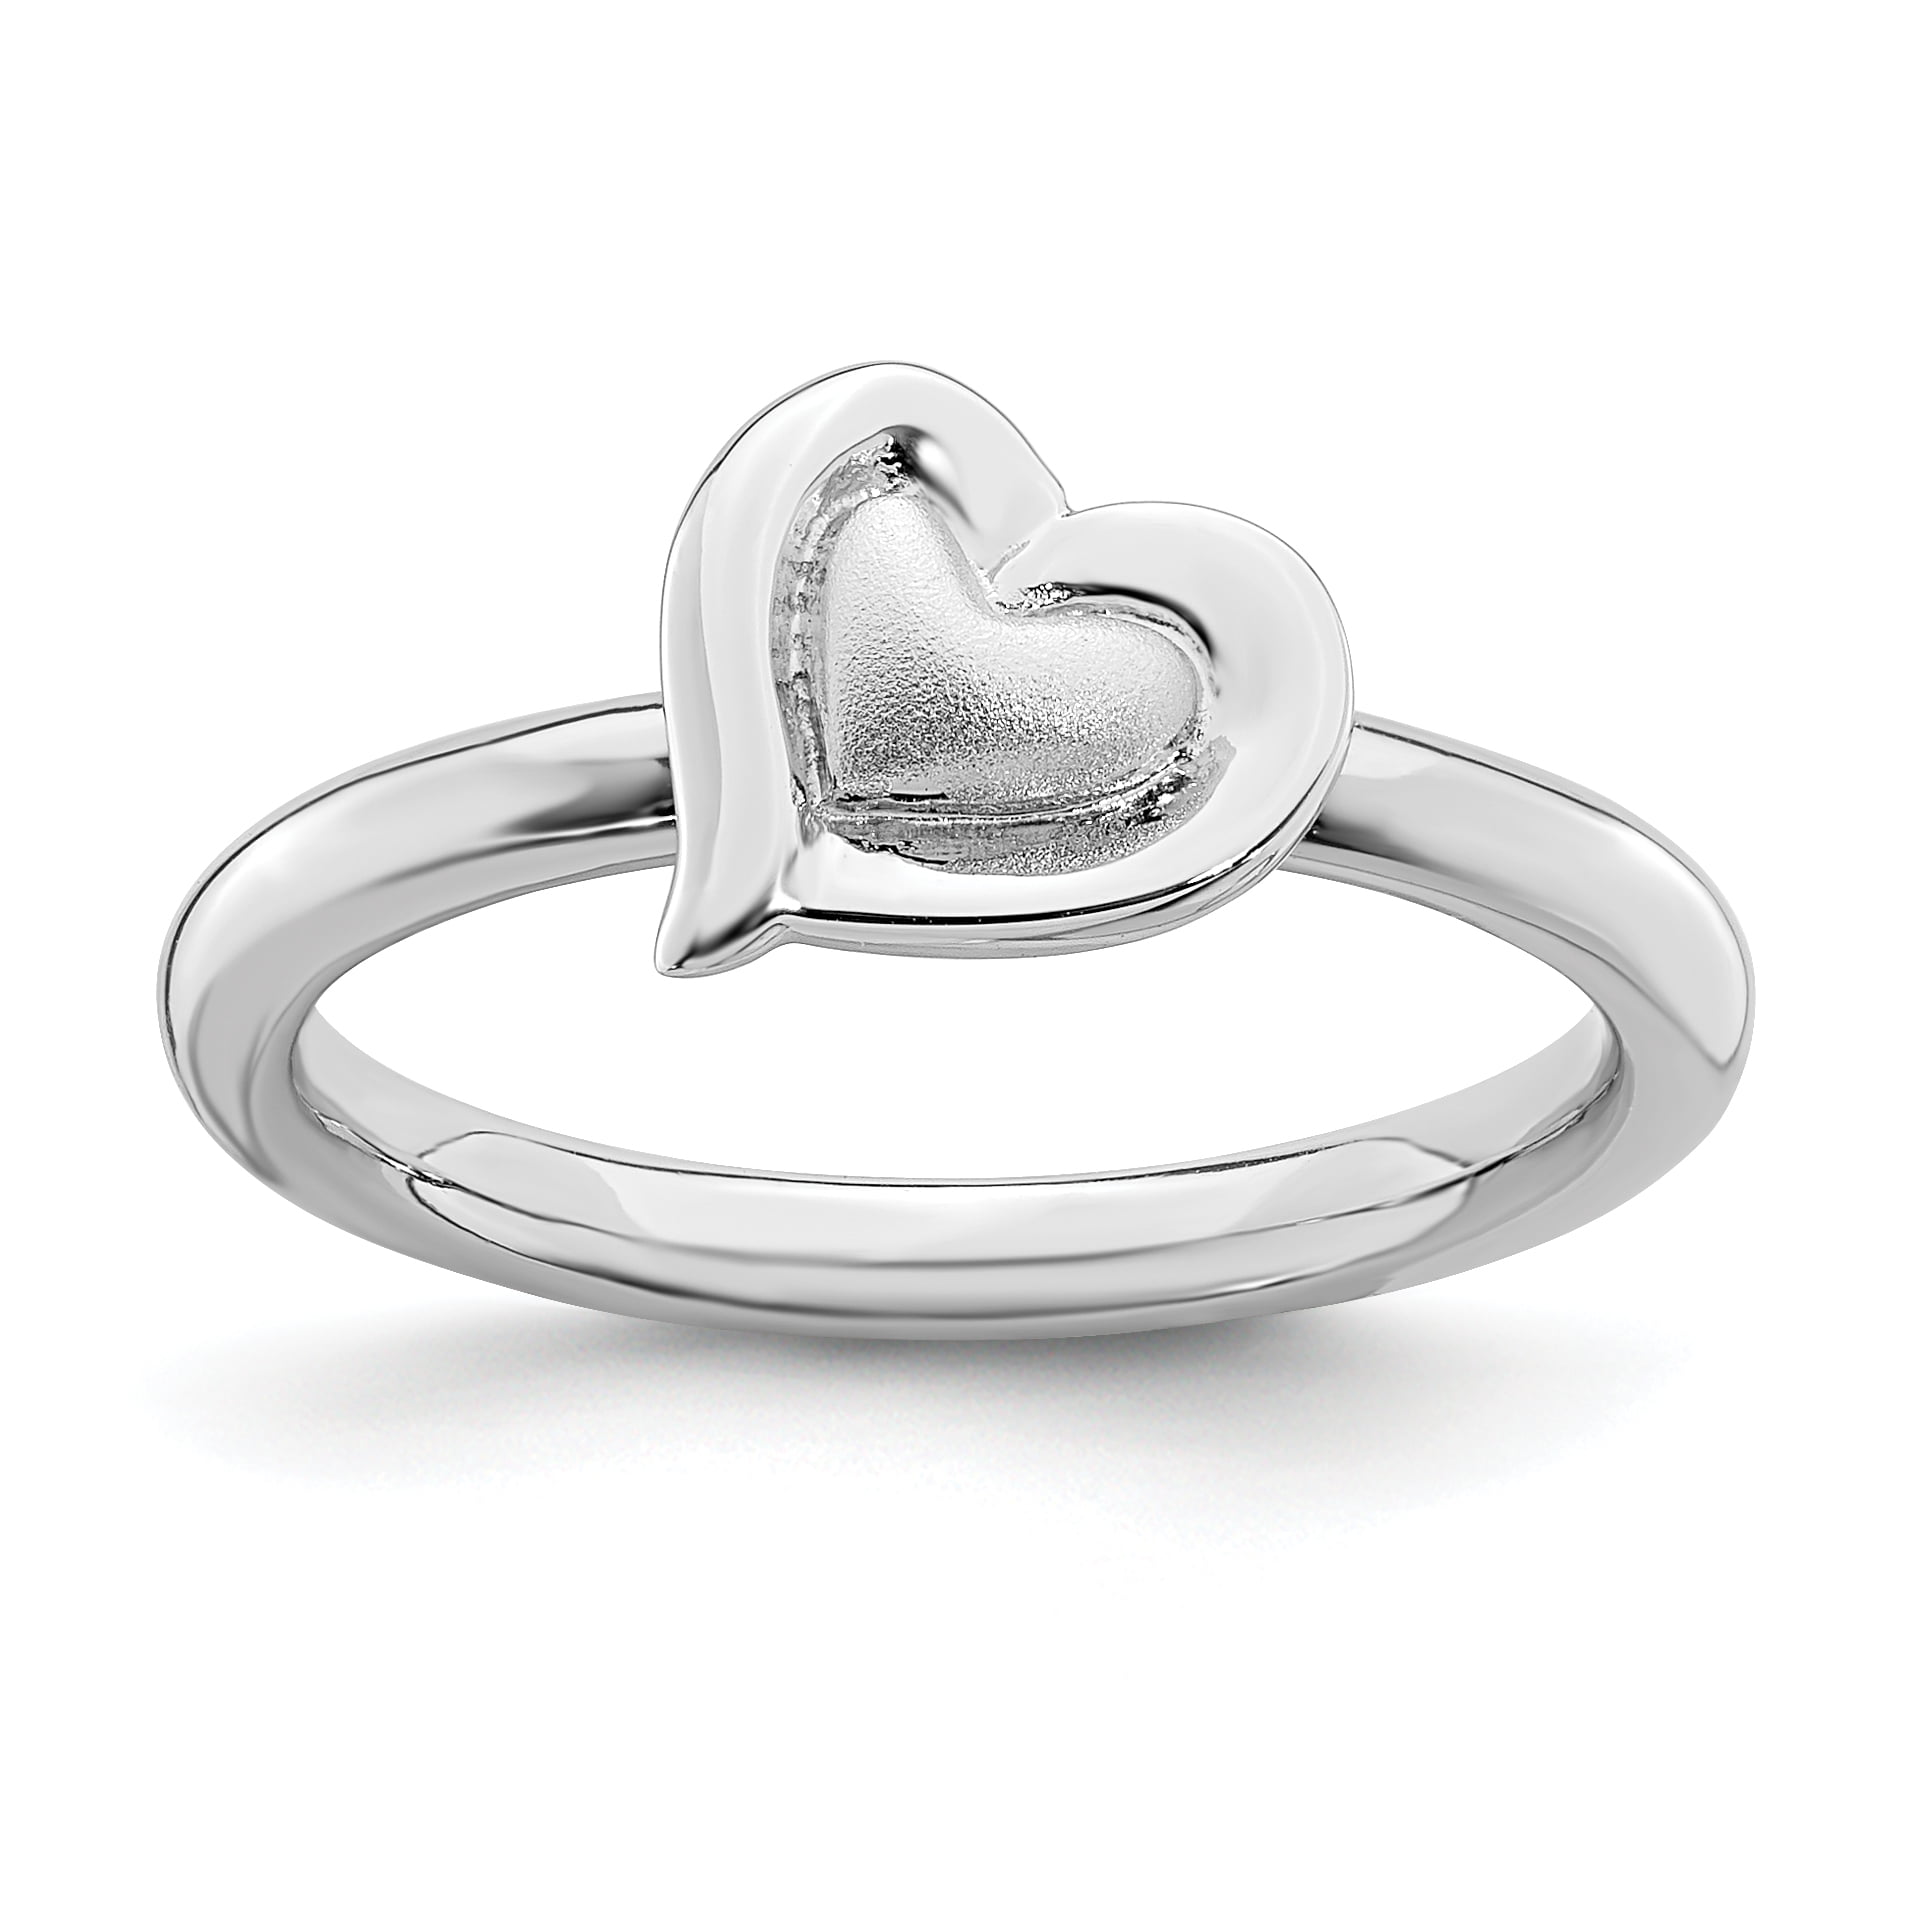 Buy Sterling Silver Heart Ring , Love Ring , Minimalist Heart Ring , Dainty Silver  Ring , Simple Ring , Gift for Her , Minimalist Ring Online in India - Etsy